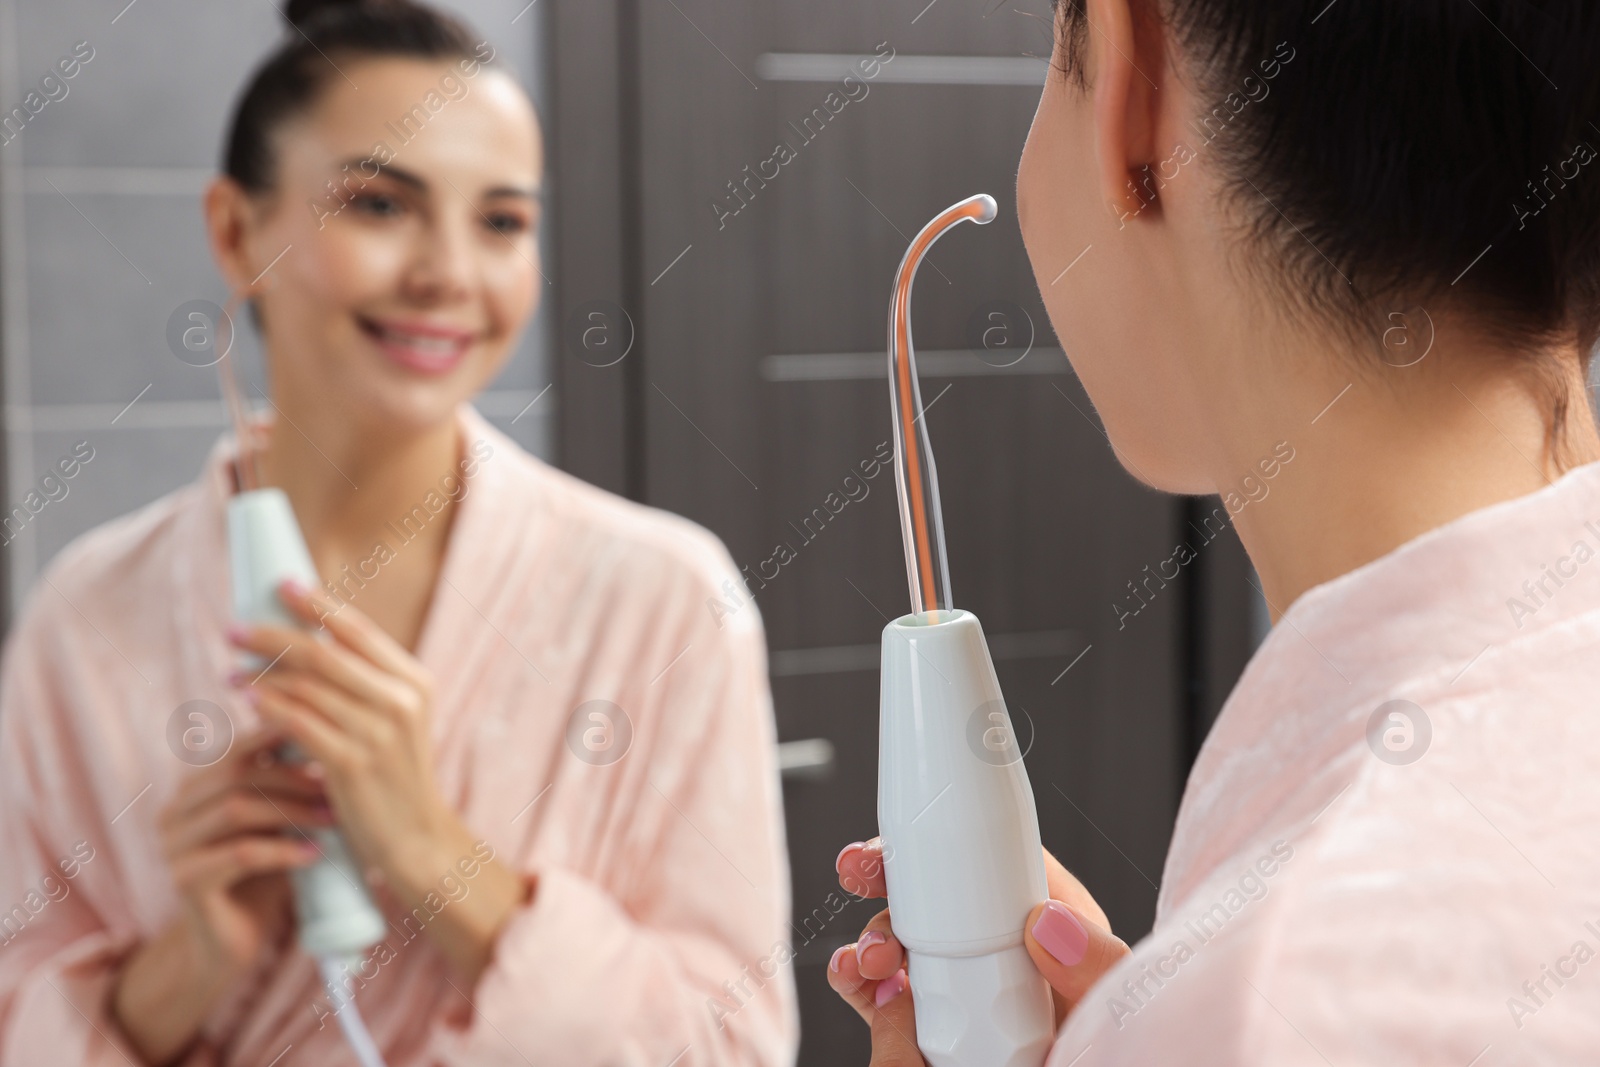 Photo of Woman using high frequency darsonval device near mirror in bathroom, closeup. Space for text